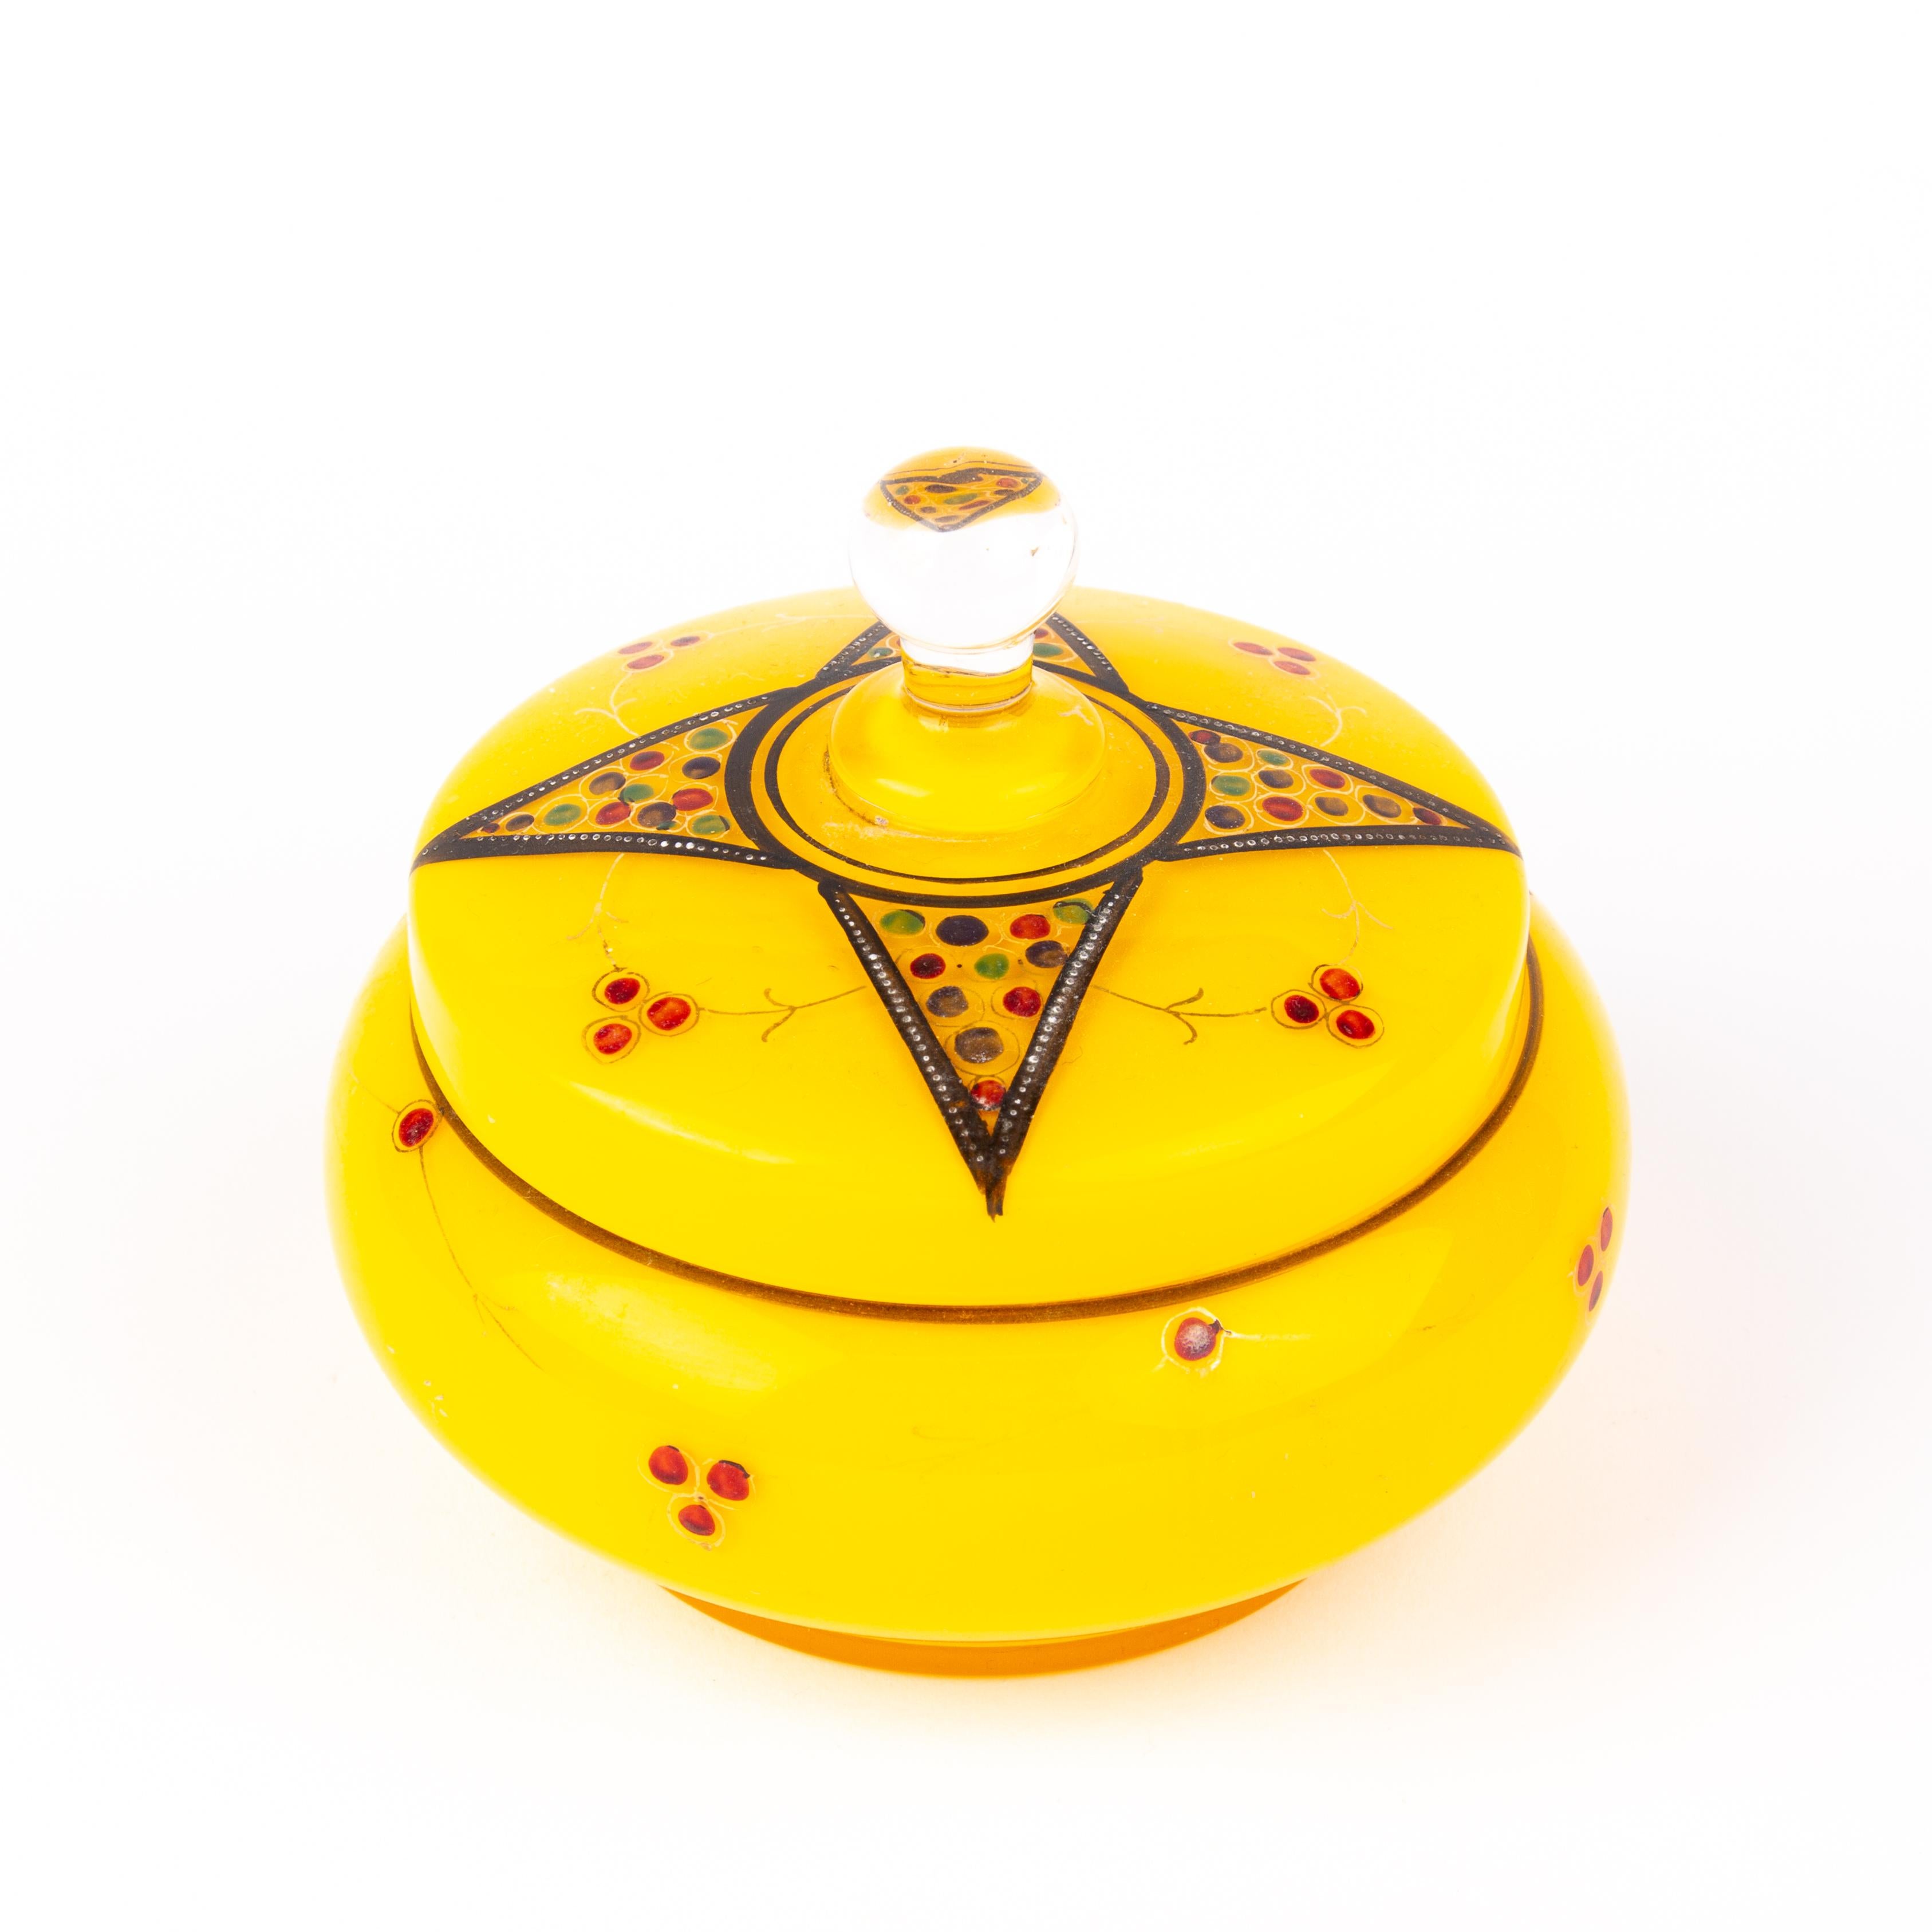 In good condition
From a private collection
Manner of Loetz Tango Enamel Bohemian Glass Lidded Art Nouveau Bomboniere